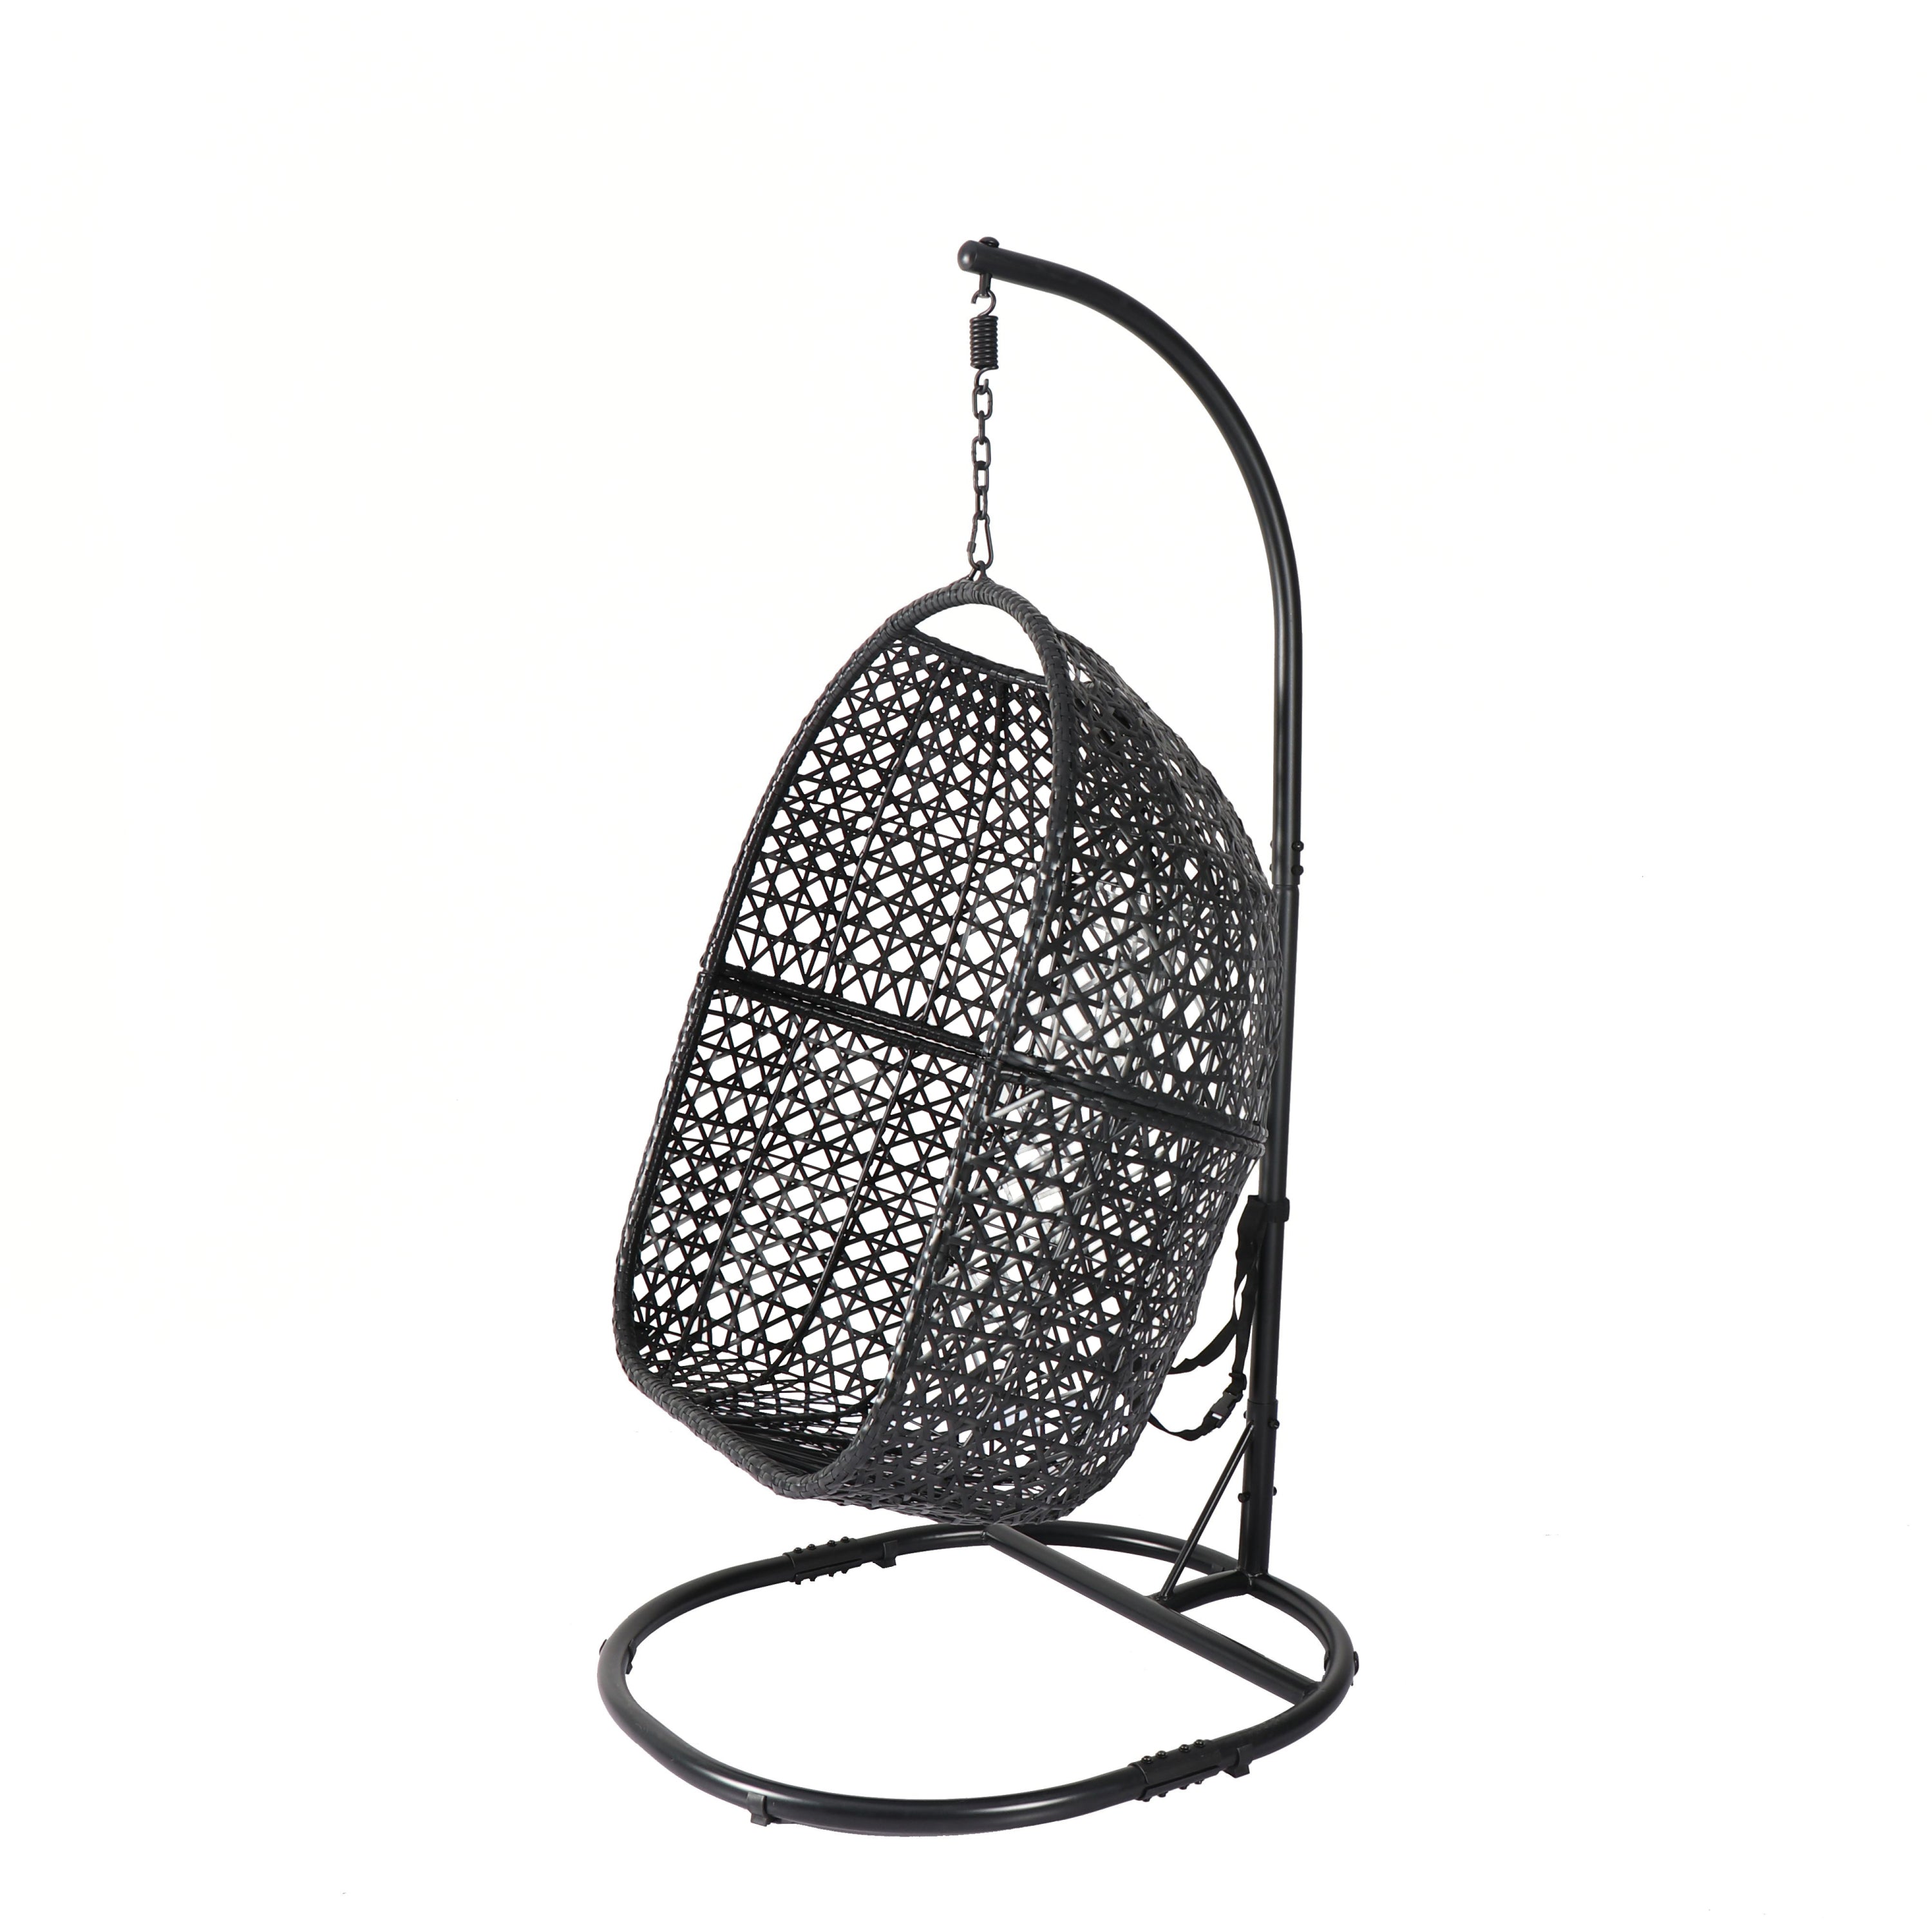 Nest Balcony Hanging Chair, 300 LBS Capacity for Home, 37.4x41.34x76.77 (Gray)